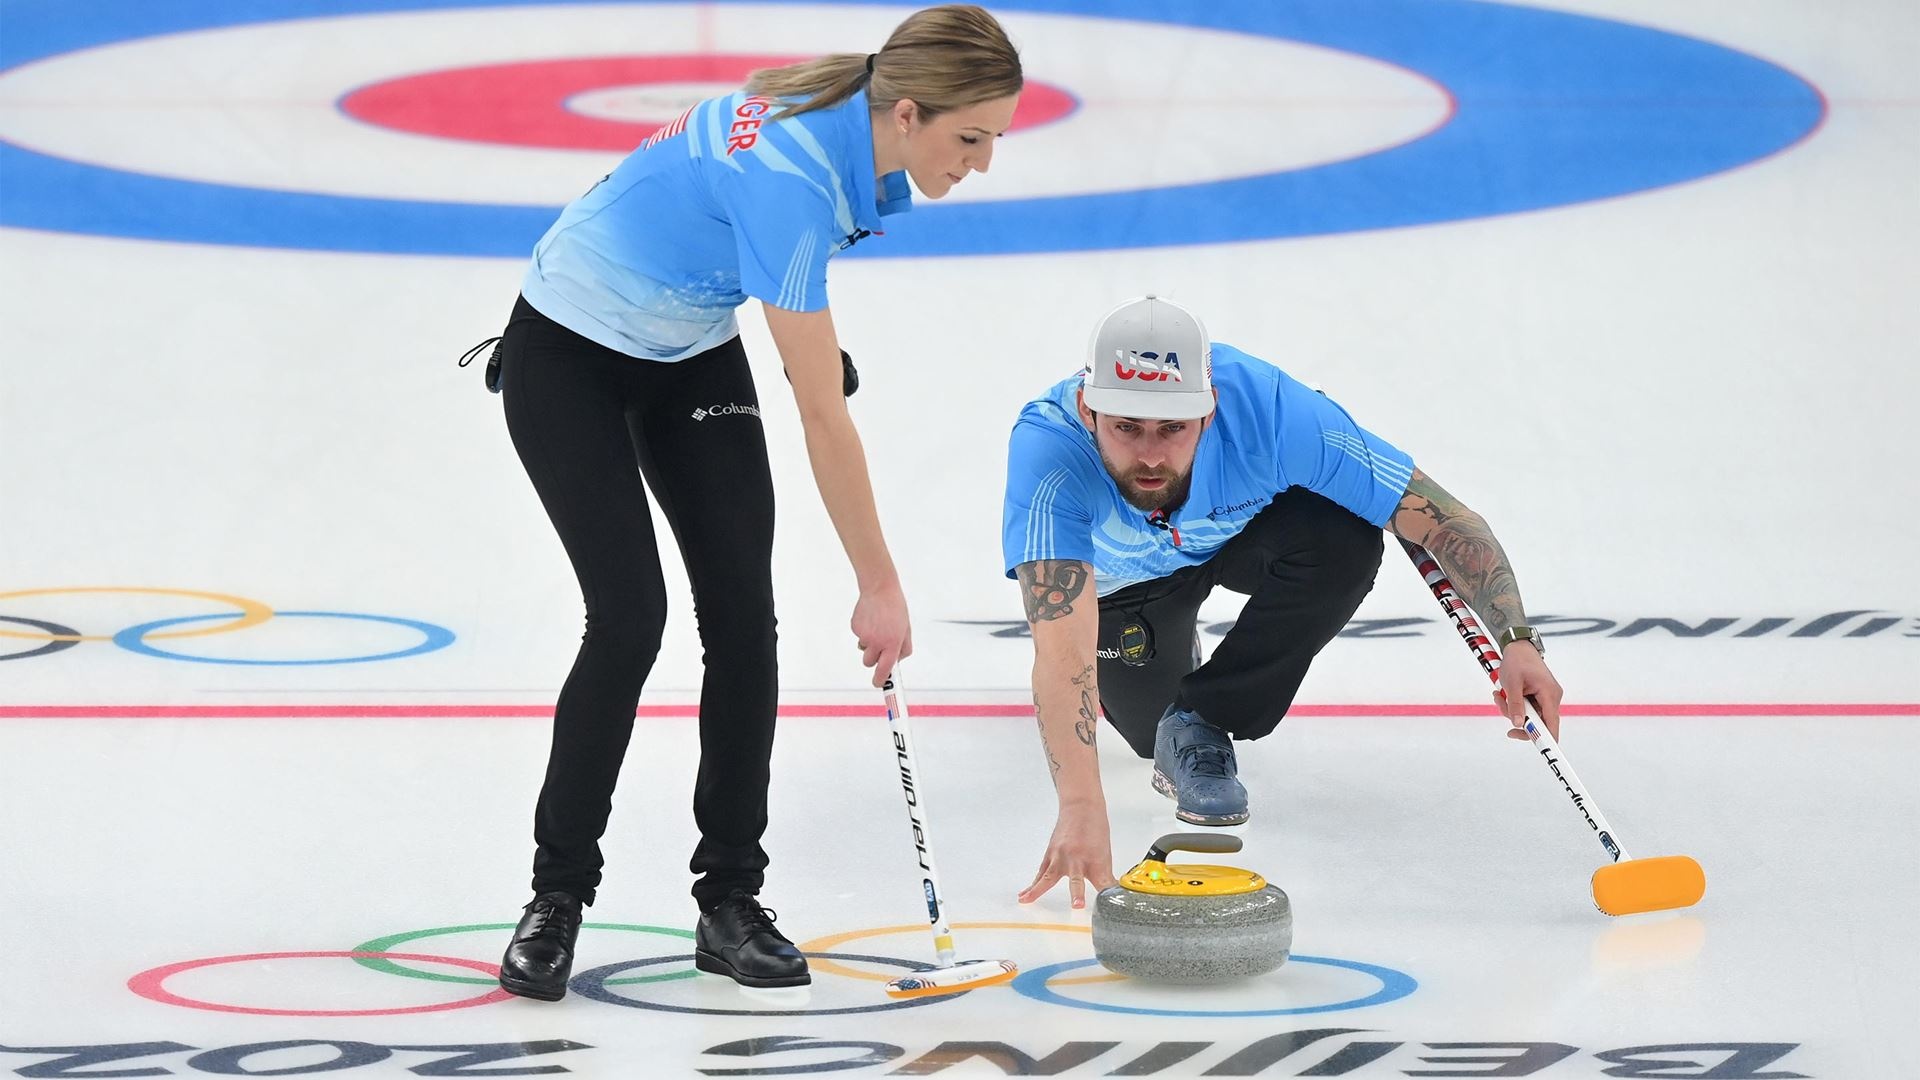 Curling: Vicky Persinger, Chris Plys, An American team, The 2022 Winter Olympics – Mixed doubles tournament. 1920x1080 Full HD Background.